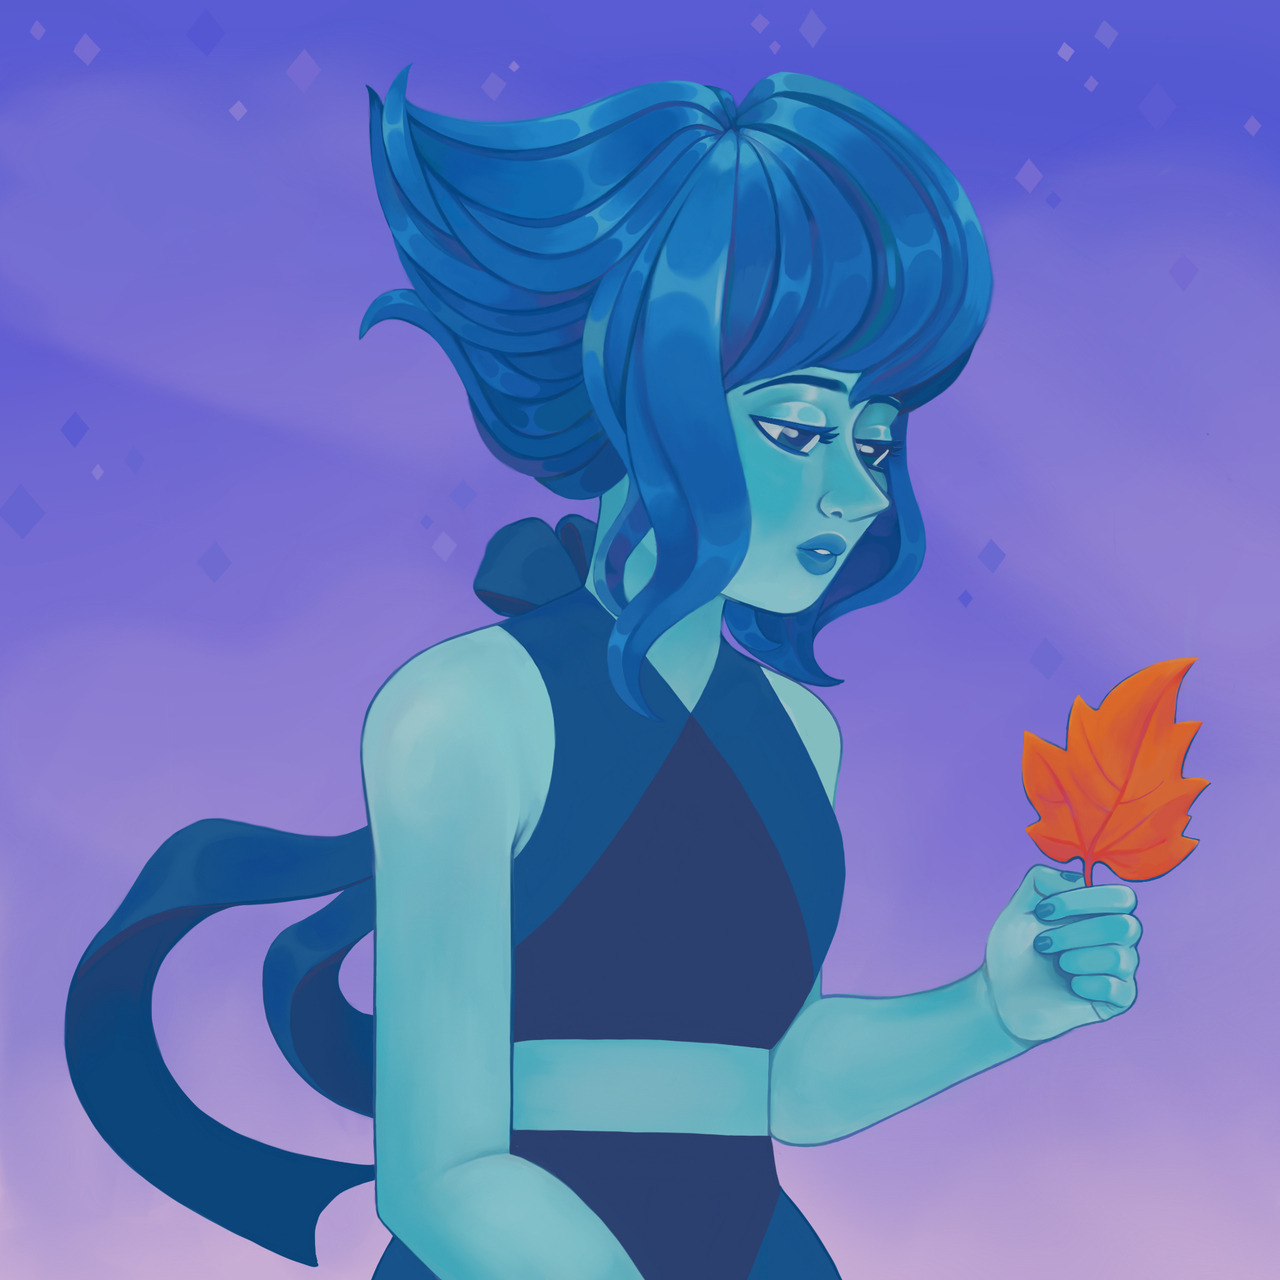 Commission of Lapis Lazuli for a friend.